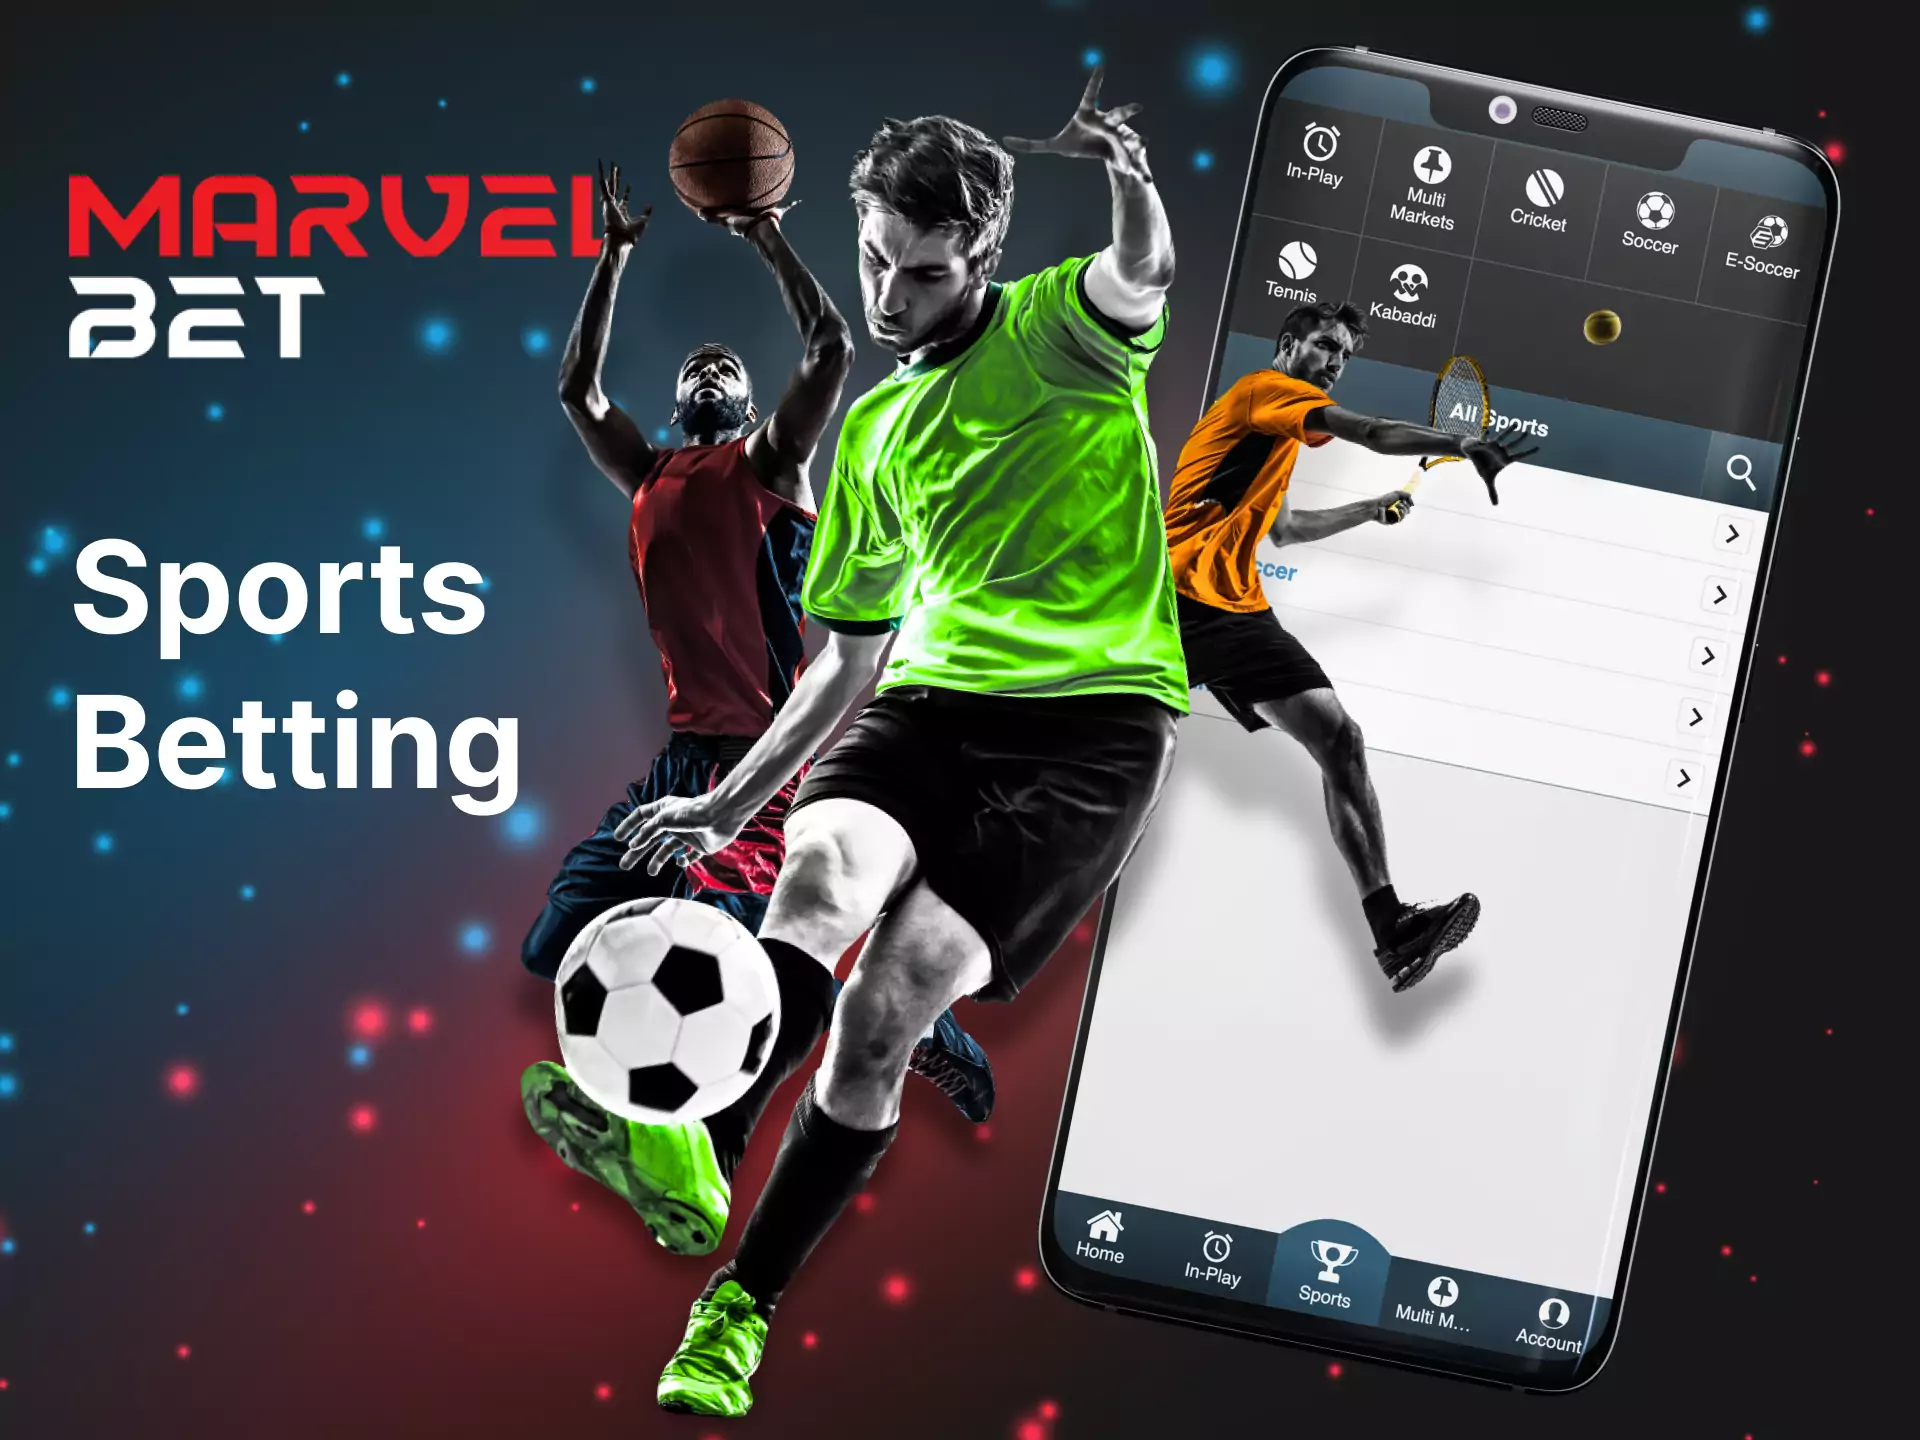 Place bets on a variety of sports with MarvelBet.